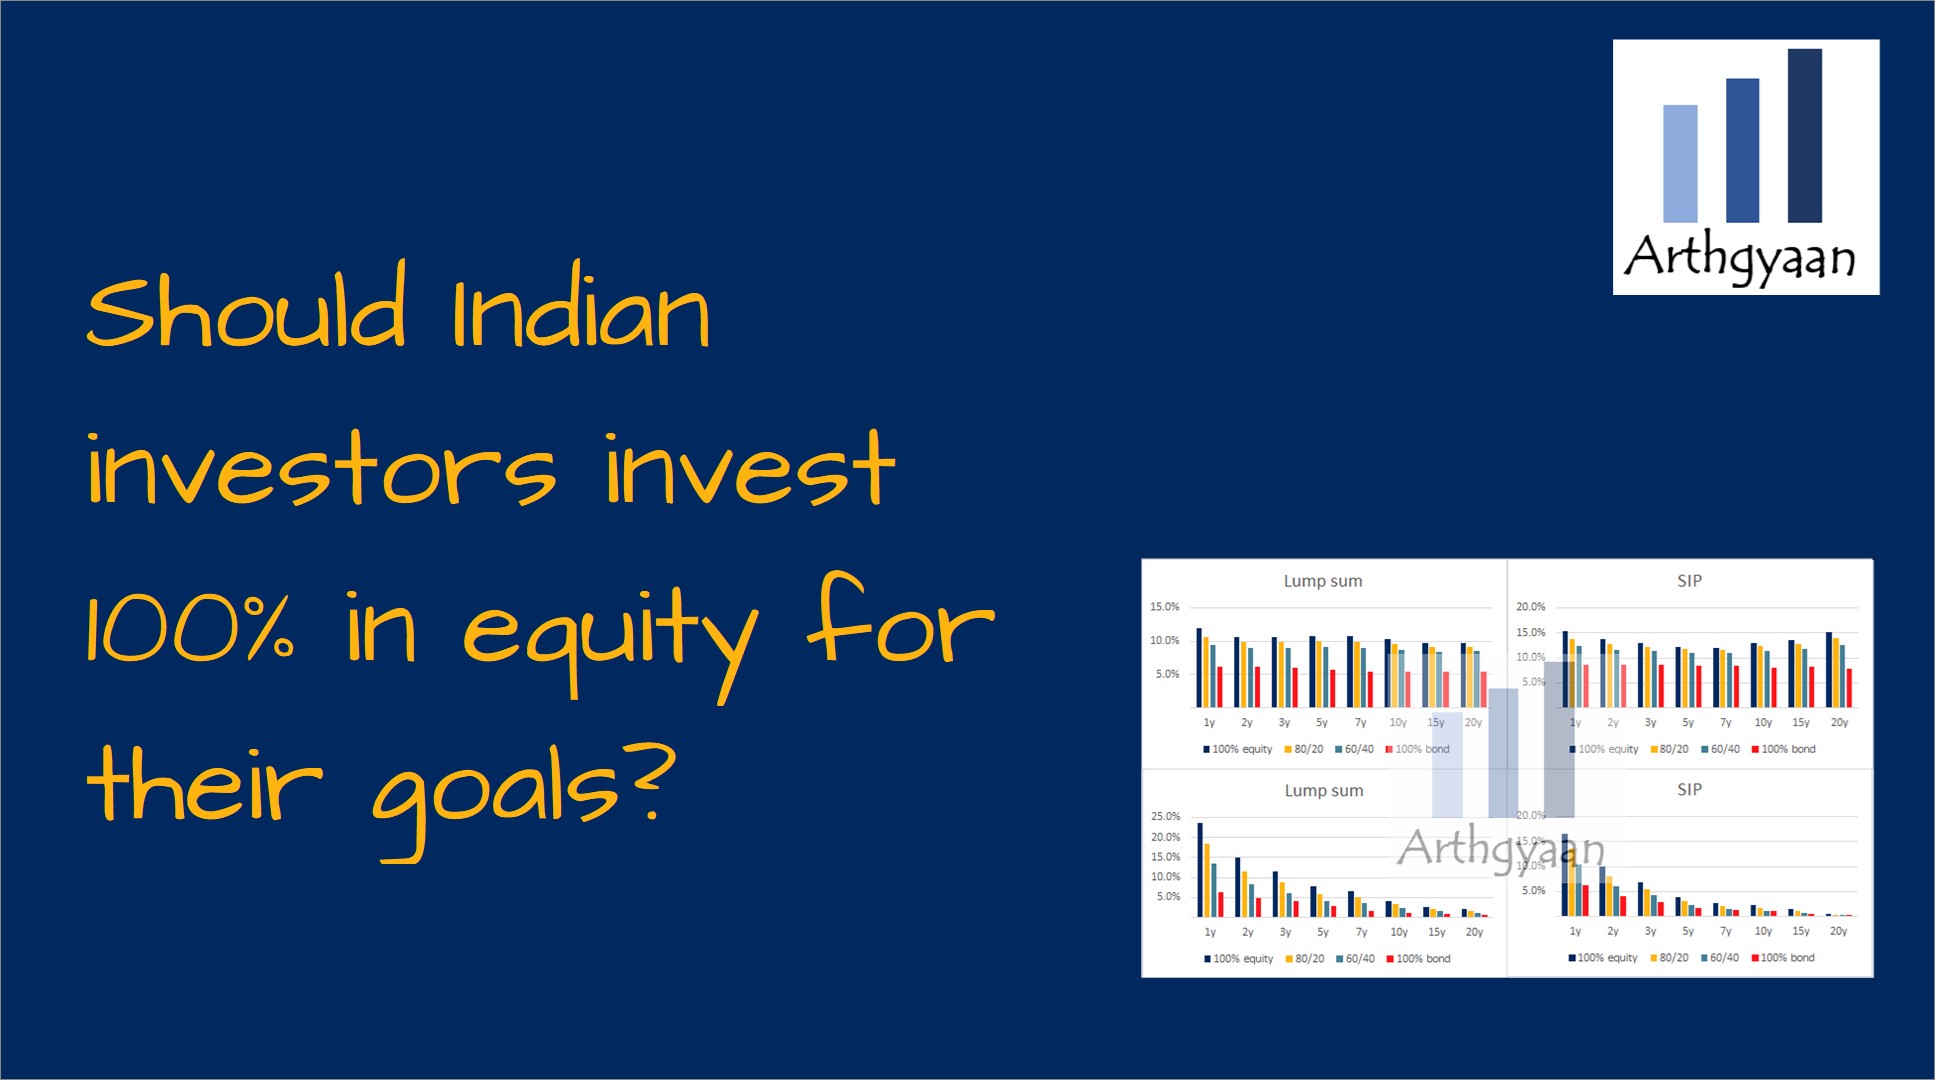 <p>This article shows a comparison of different asset-allocation values for debt and equity for different holding periods for Indian investors.</p>

